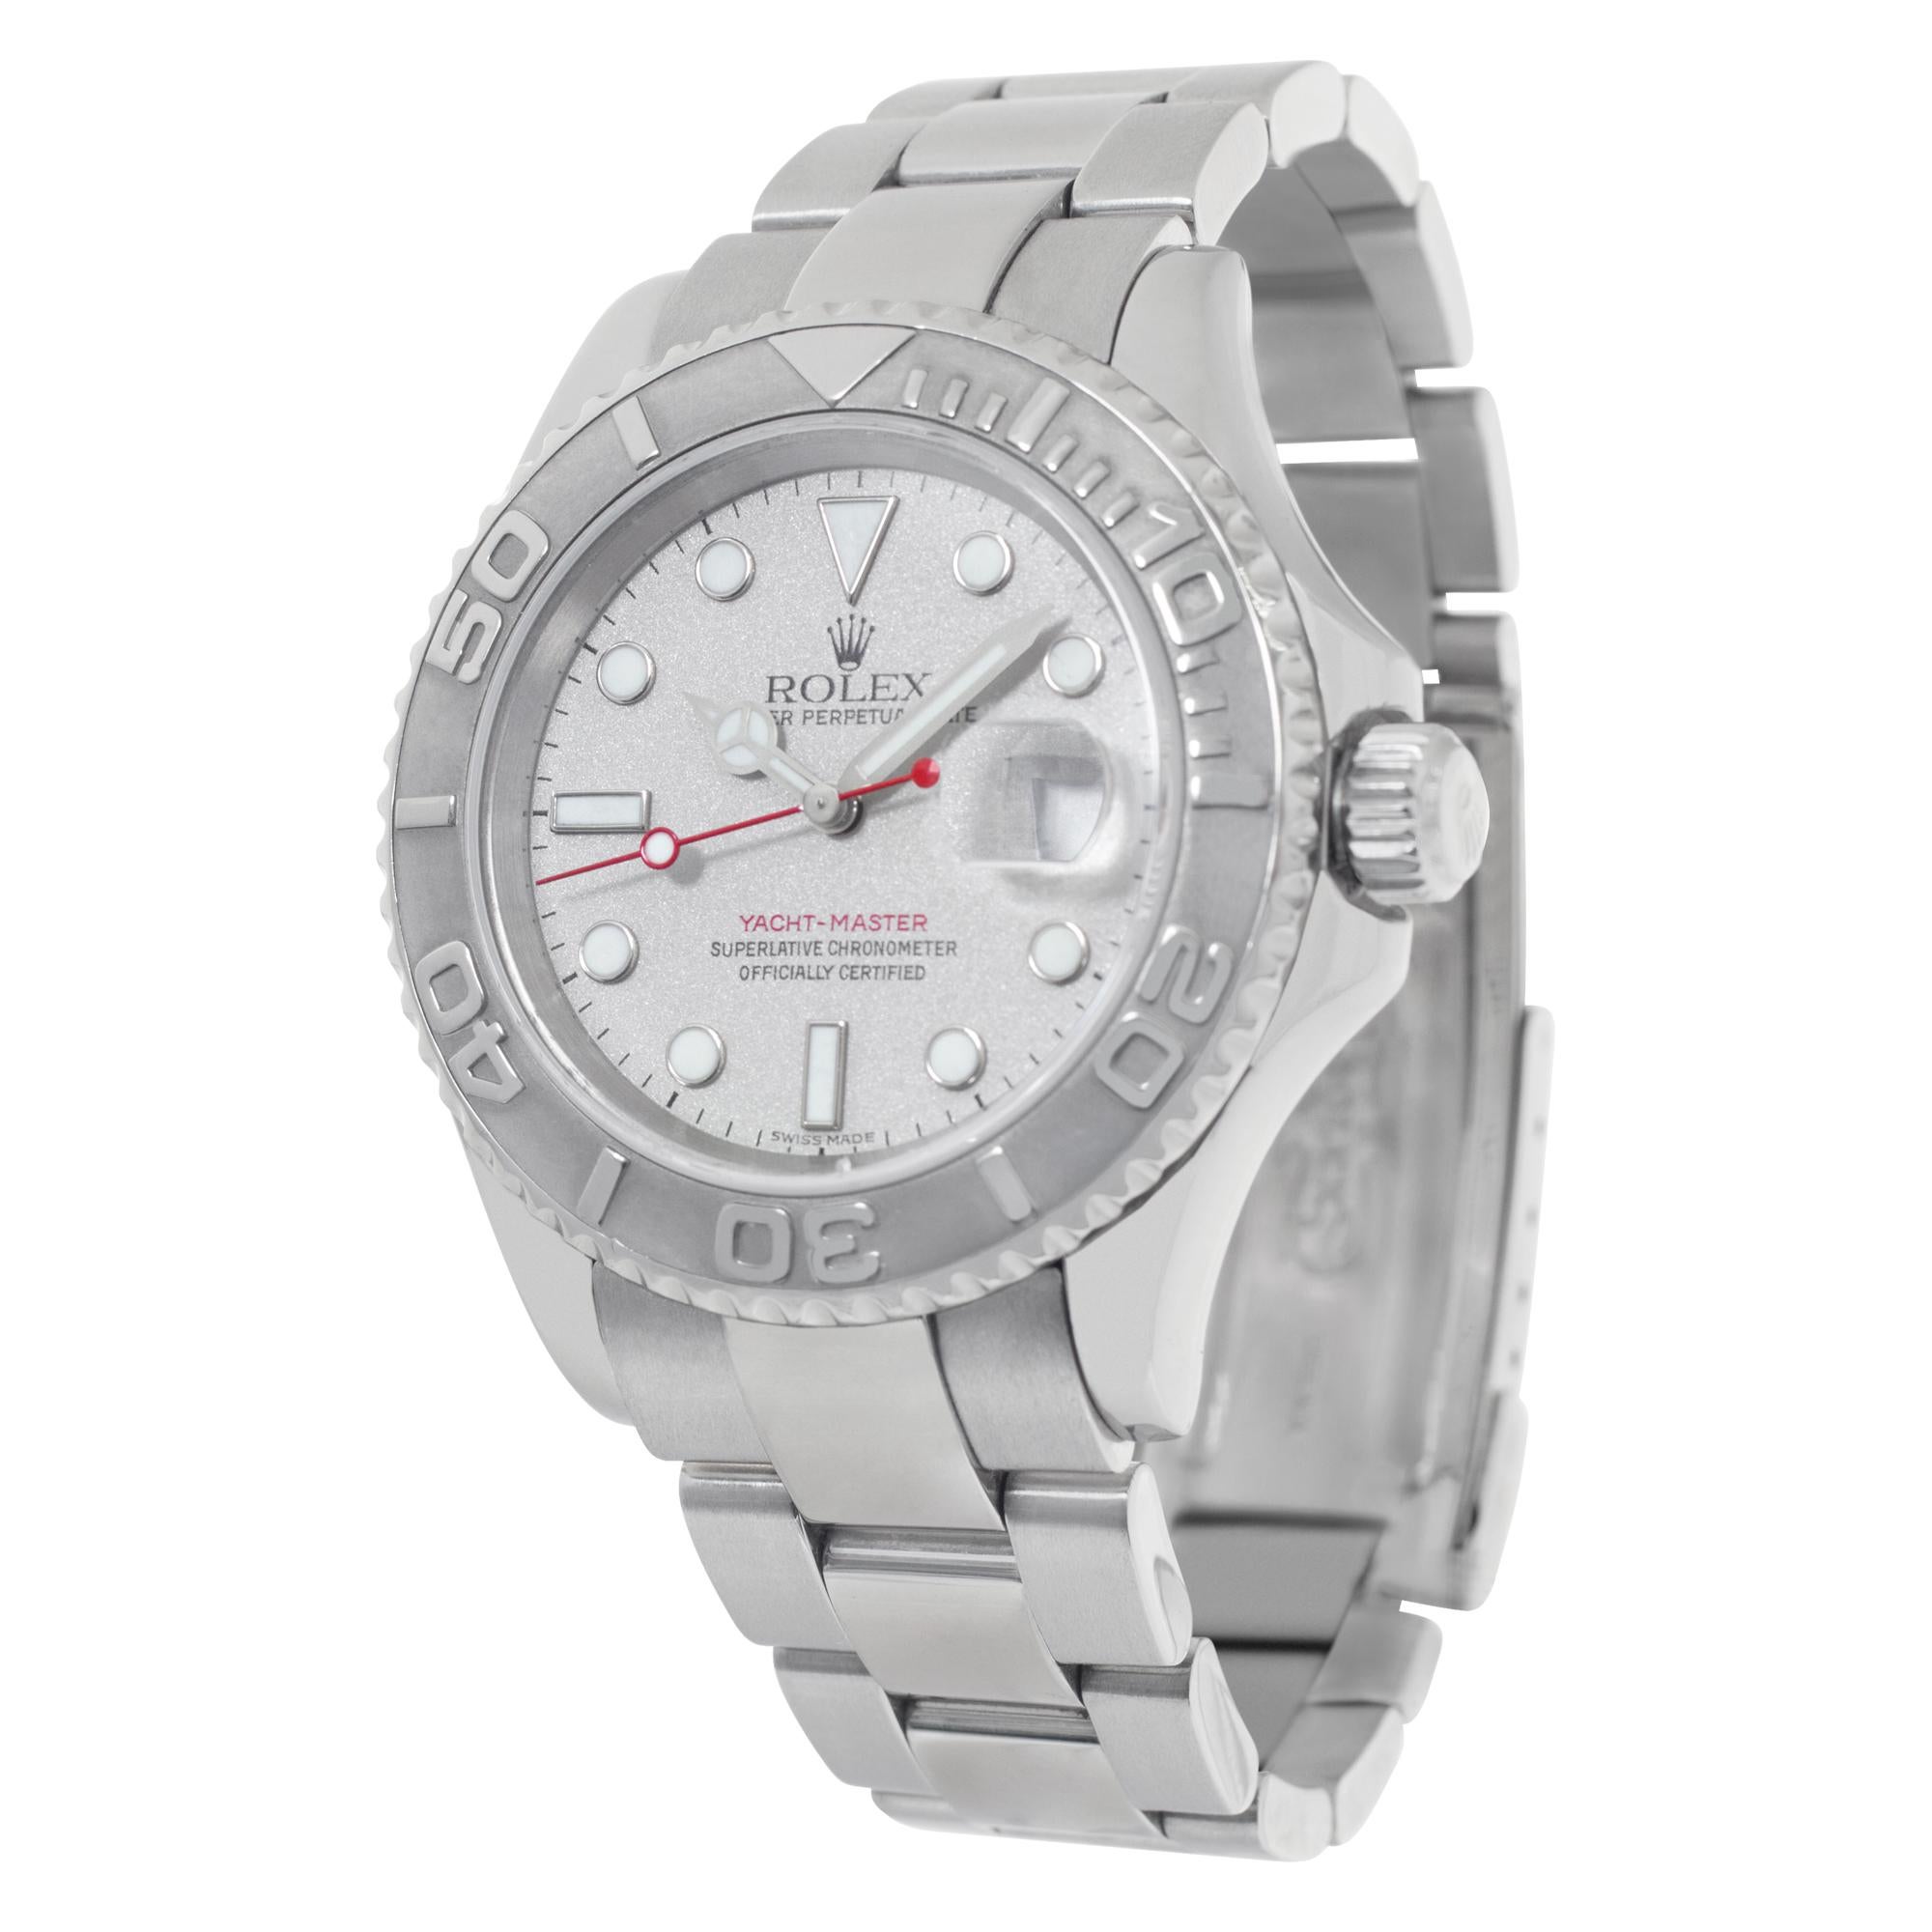 Rolex Yacht-Master in stainless steel with platinum bezel. Auto w/ sweep seconds and date. 40 mm case size. Ref 16622. Circa 2002. **Bank wire only at this price** Fine Pre-owned Rolex Watch.

Certified preowned Sport Rolex Yacht-Master 16622 watch